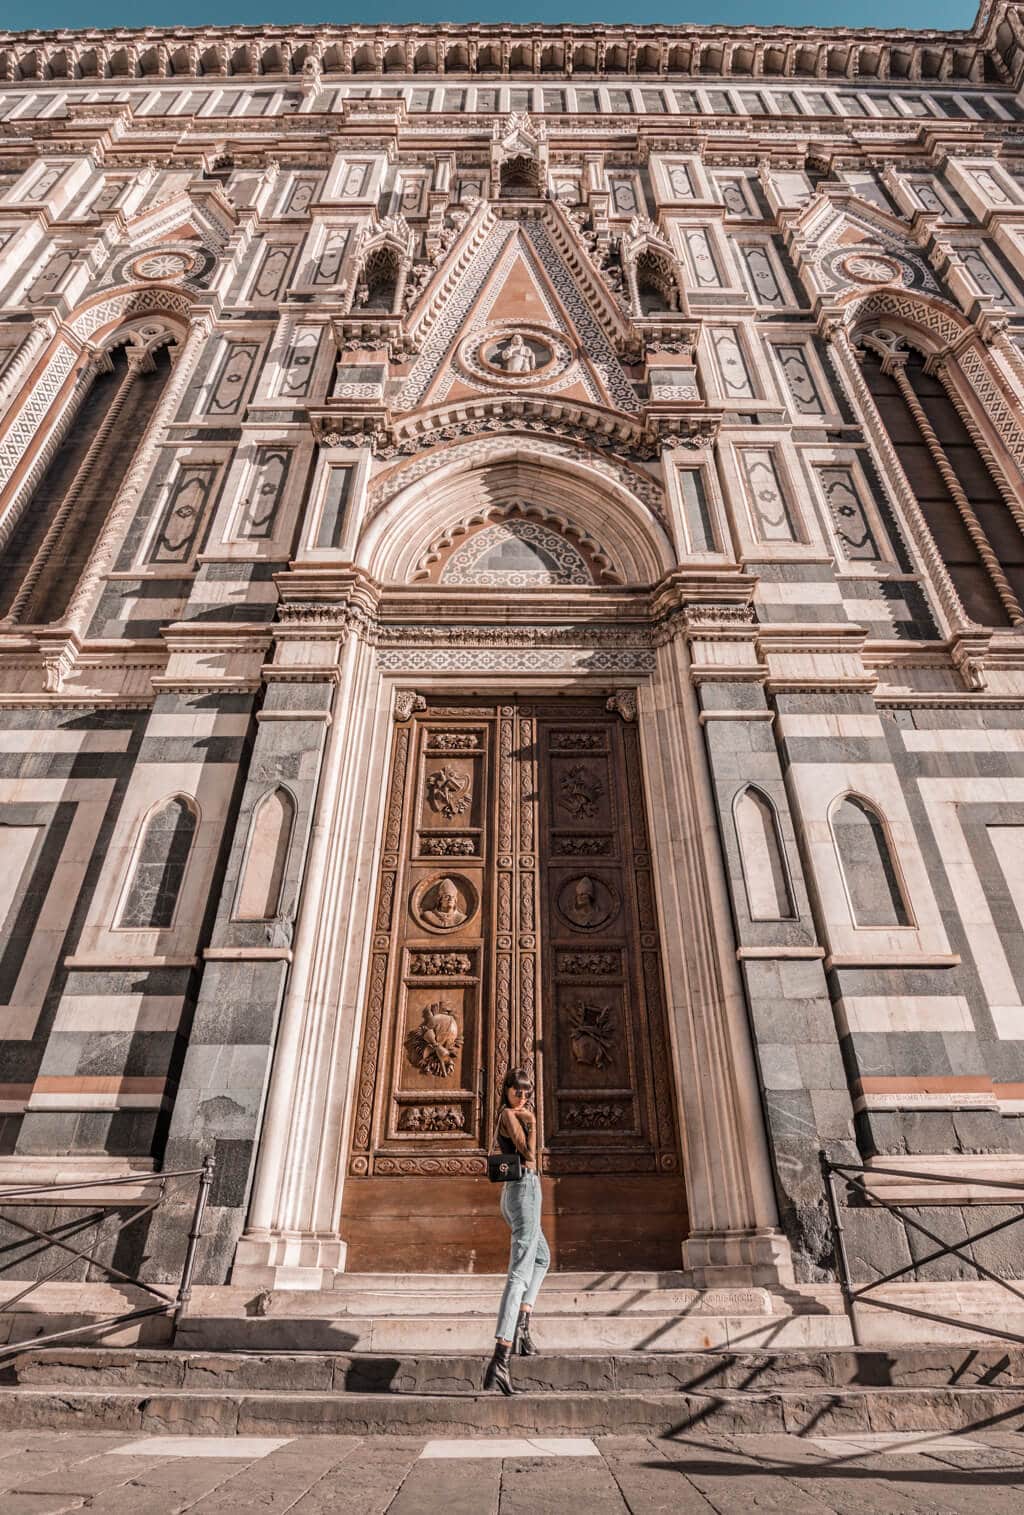 A Guide For Planning A Trip To Florence - Things to do in Tuscan's capital {2 day itinerary, including food & restaurants tips, pasta making and sightseeing}